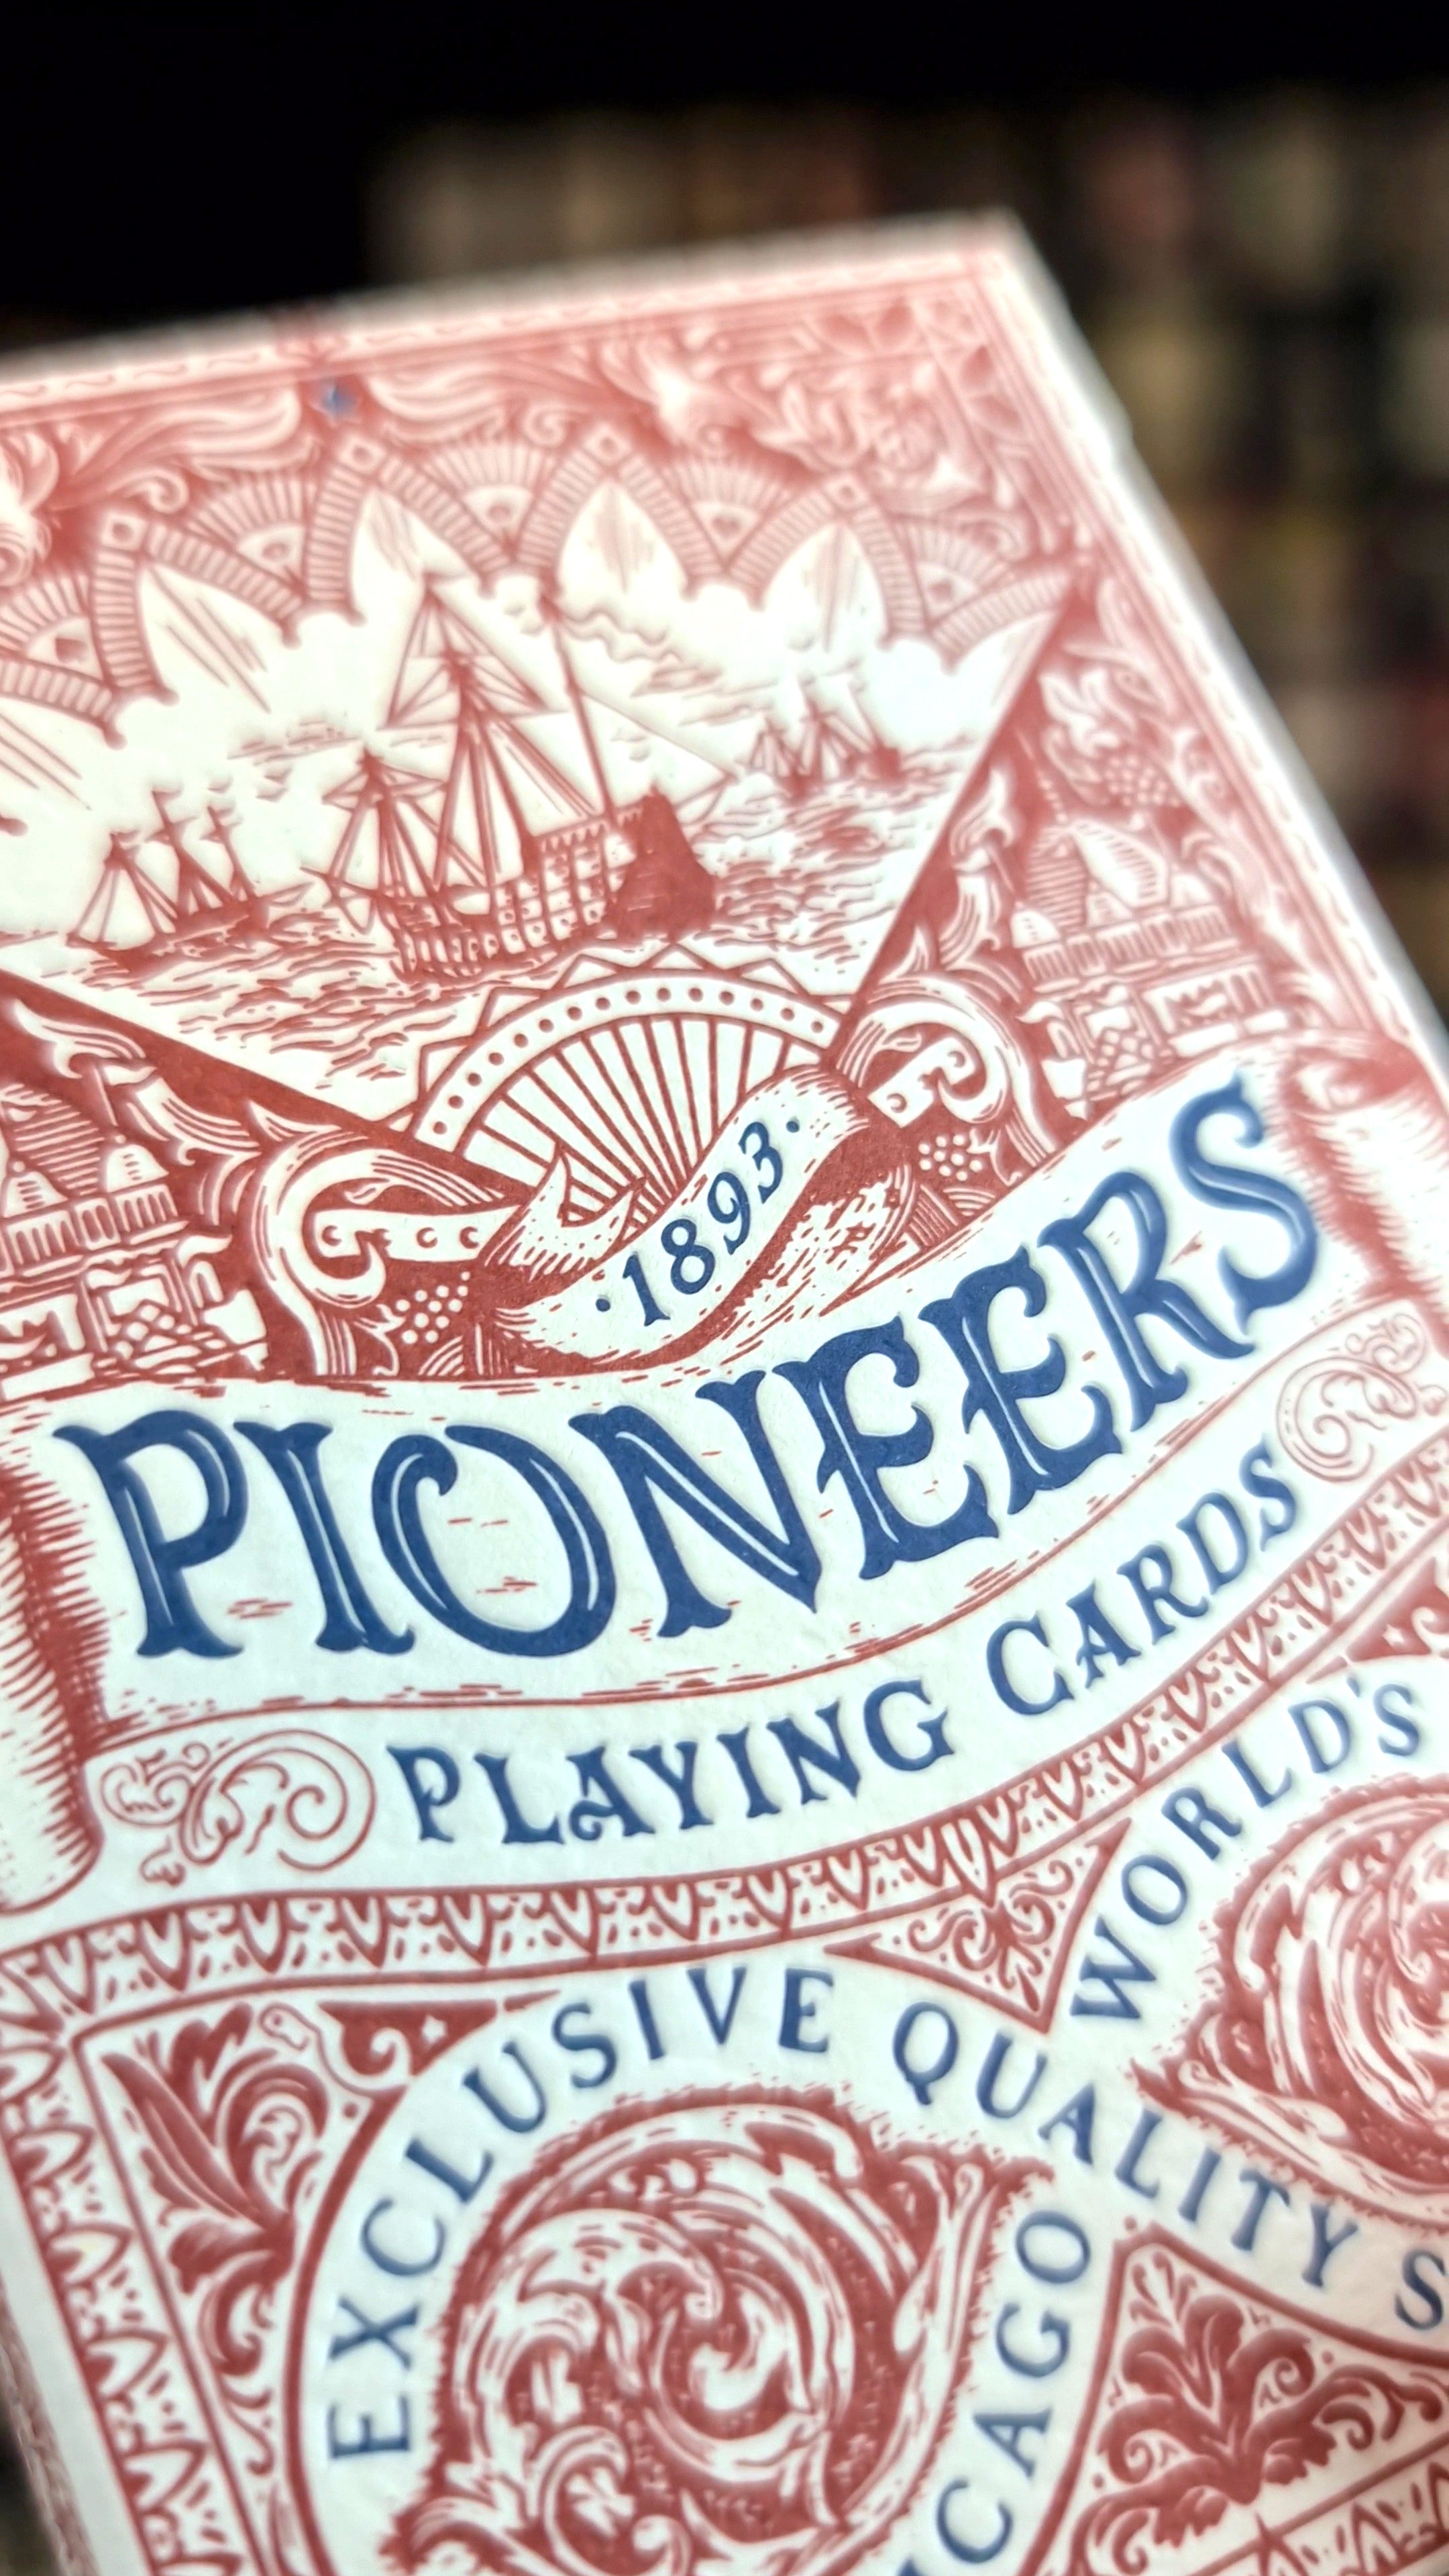 Pioneers Playing Cards by Ellusionist